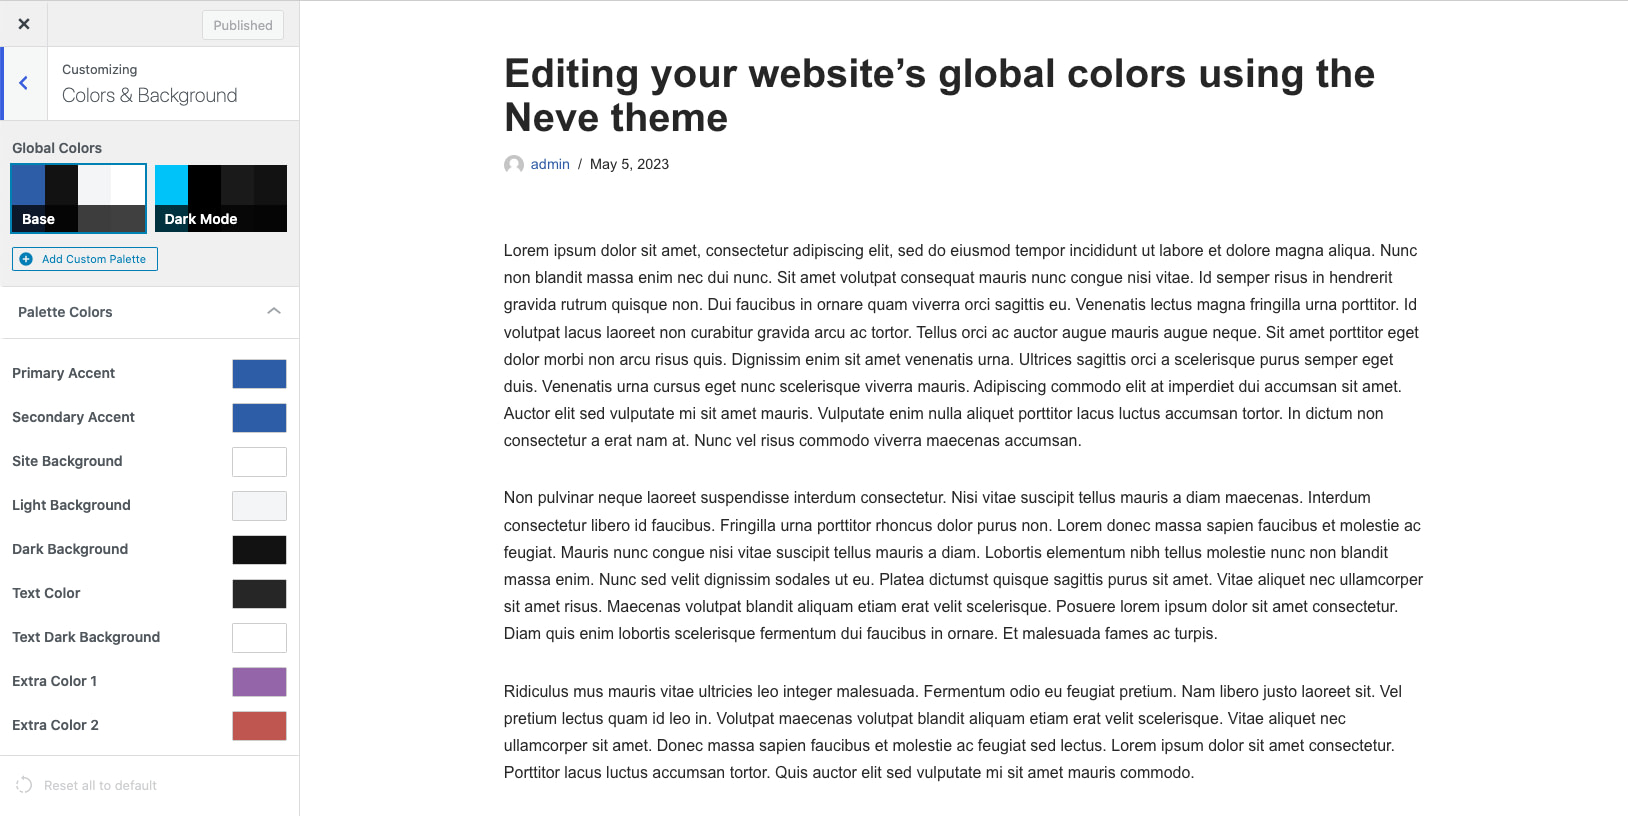 Editing the global color scheme for a website using the Neve theme.